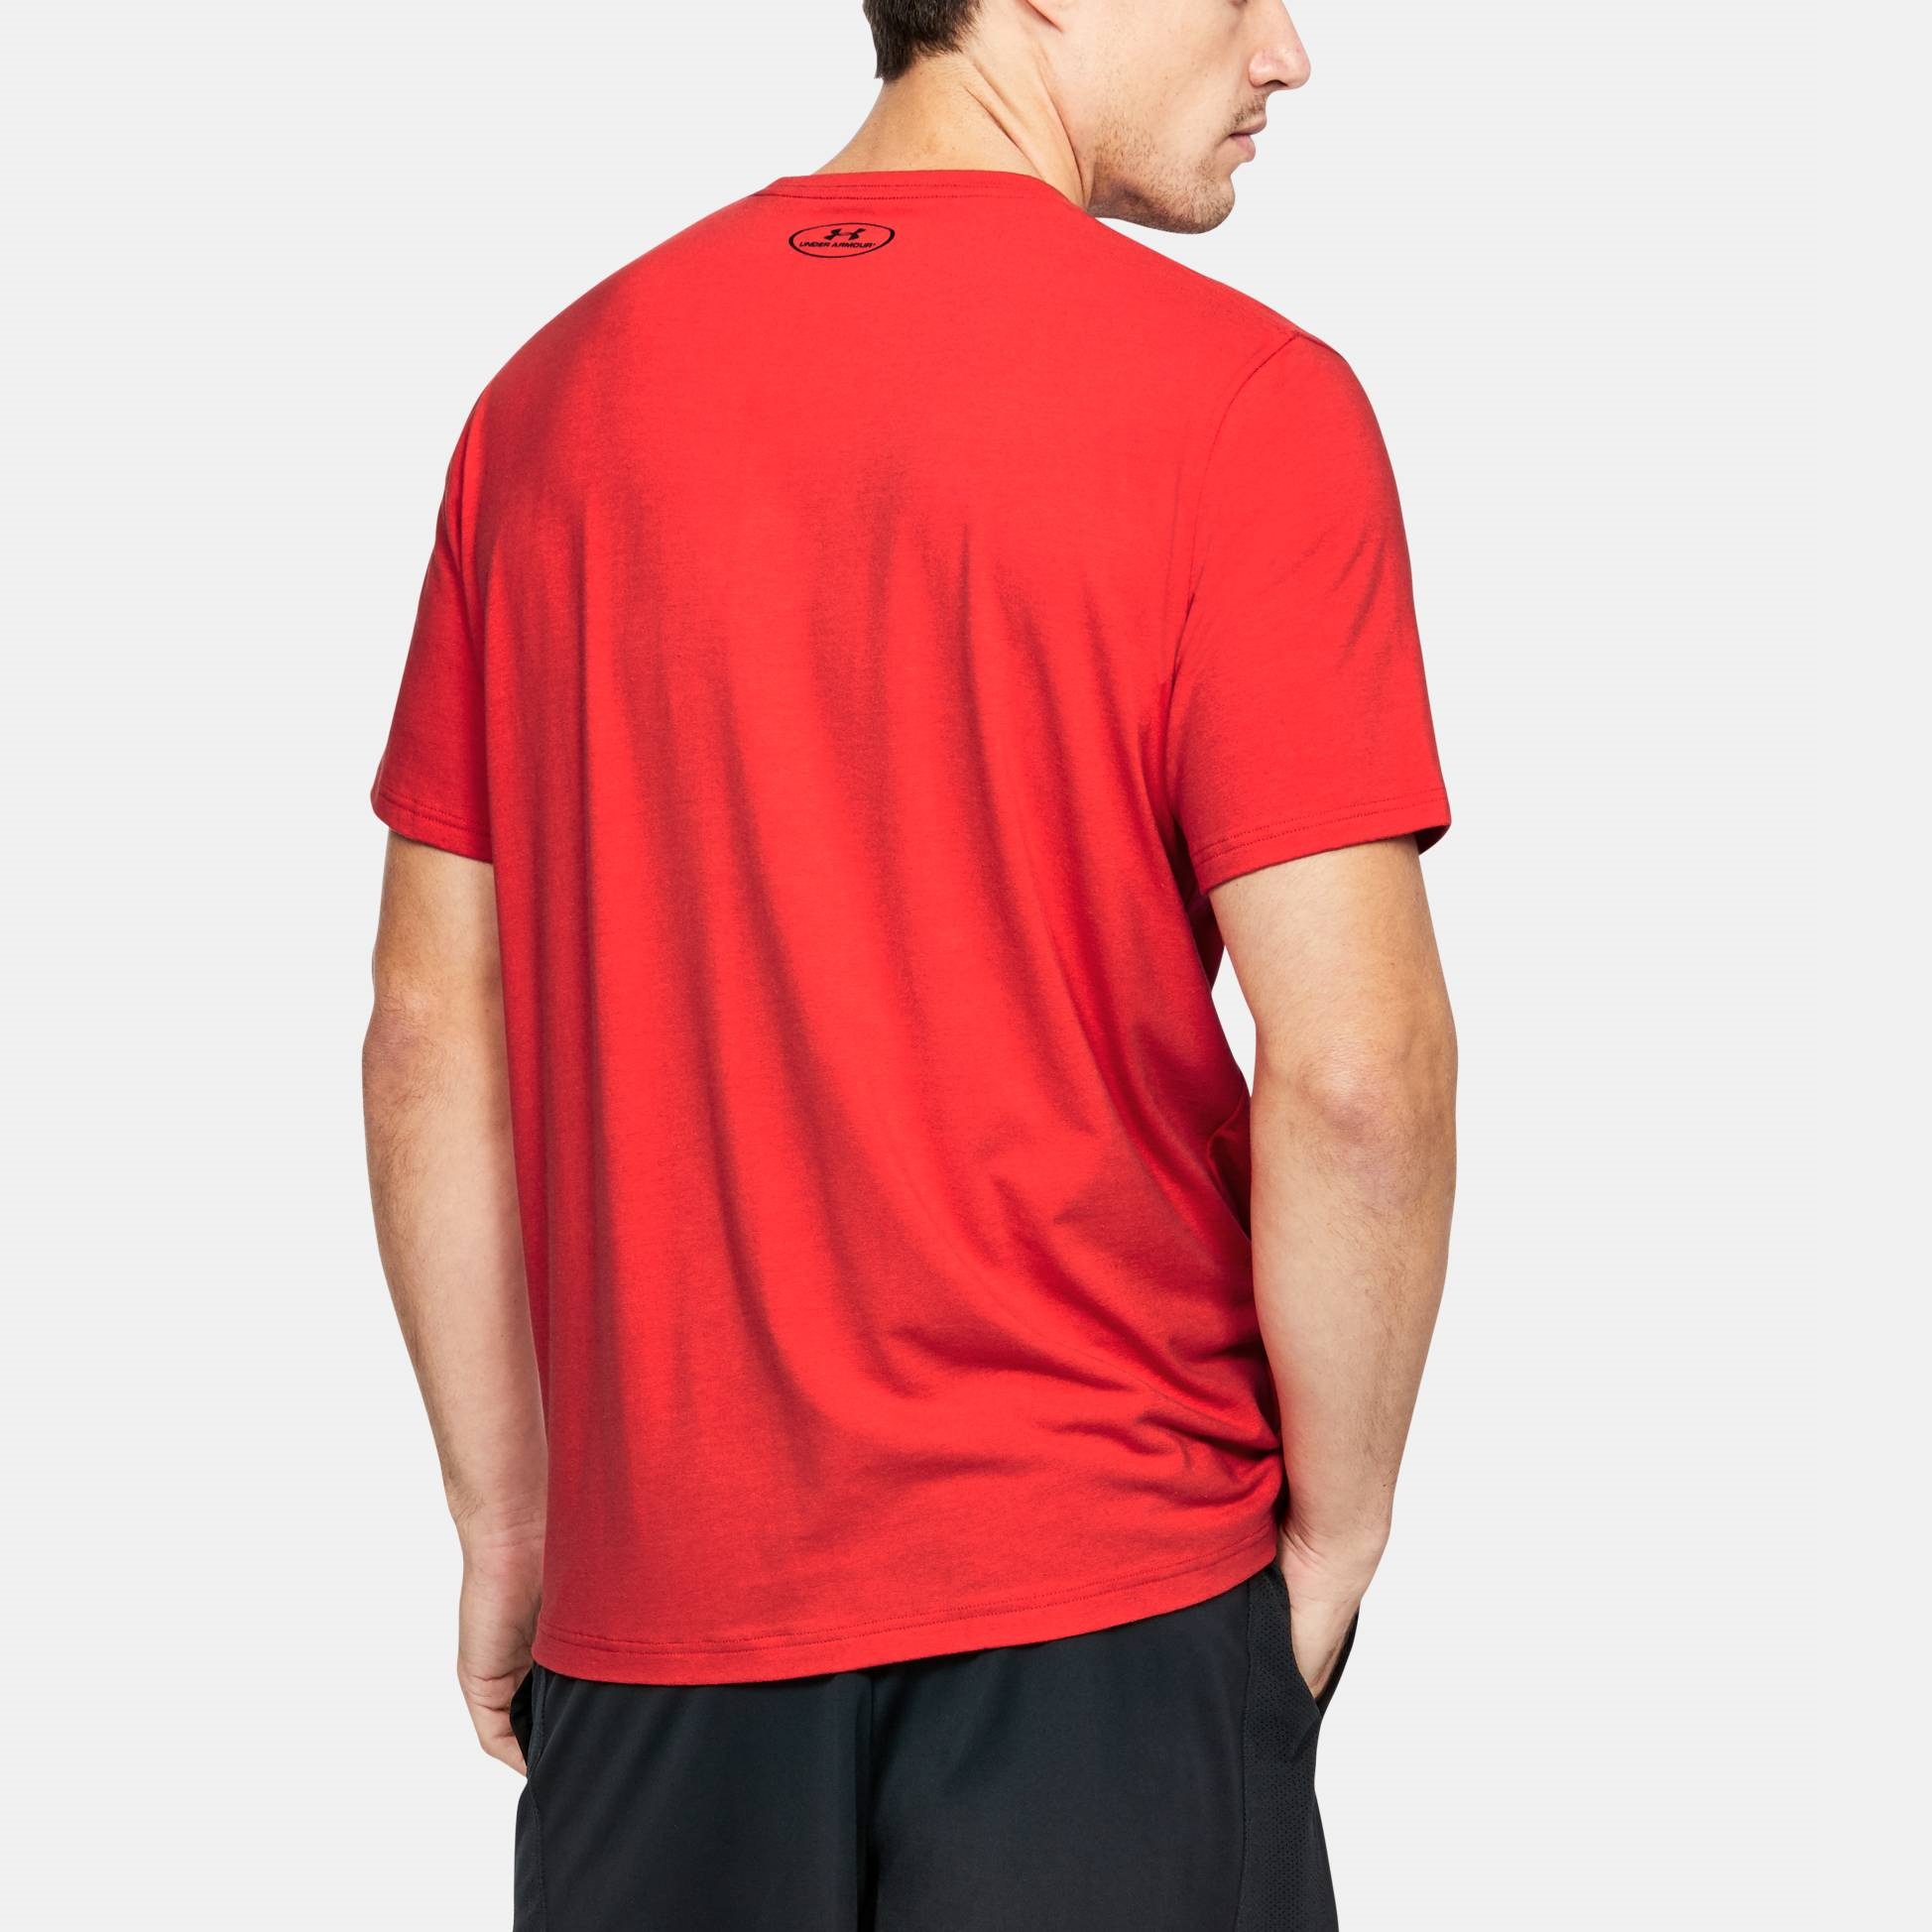  -  under armour Gains Aren t Given T-Shirt